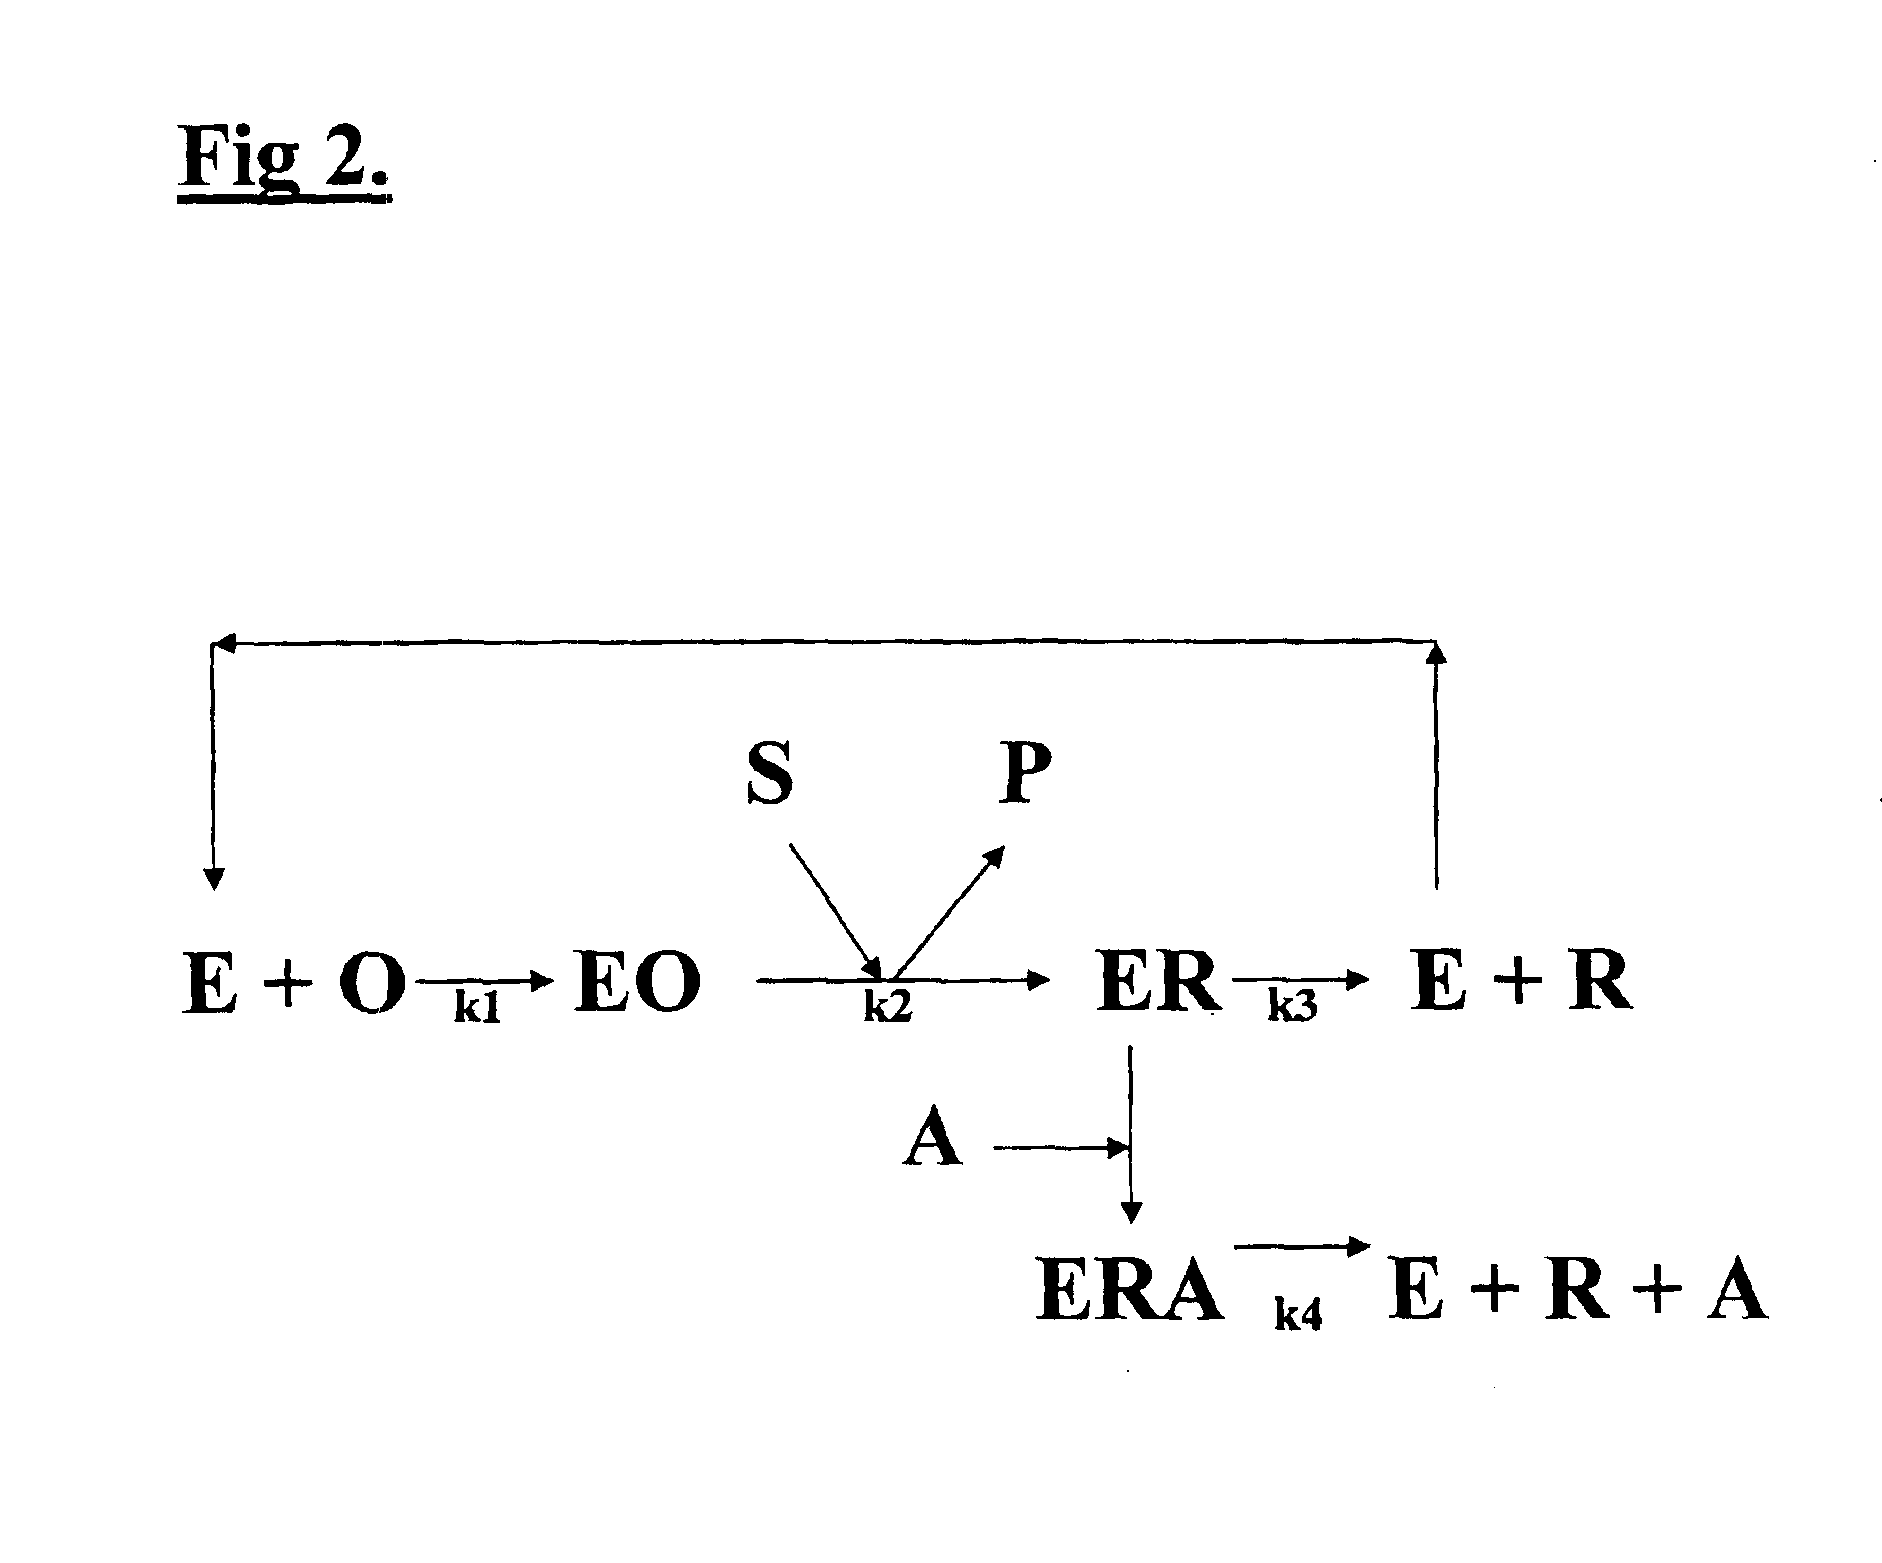 Composition for stimulation of specific metallo-enzymes